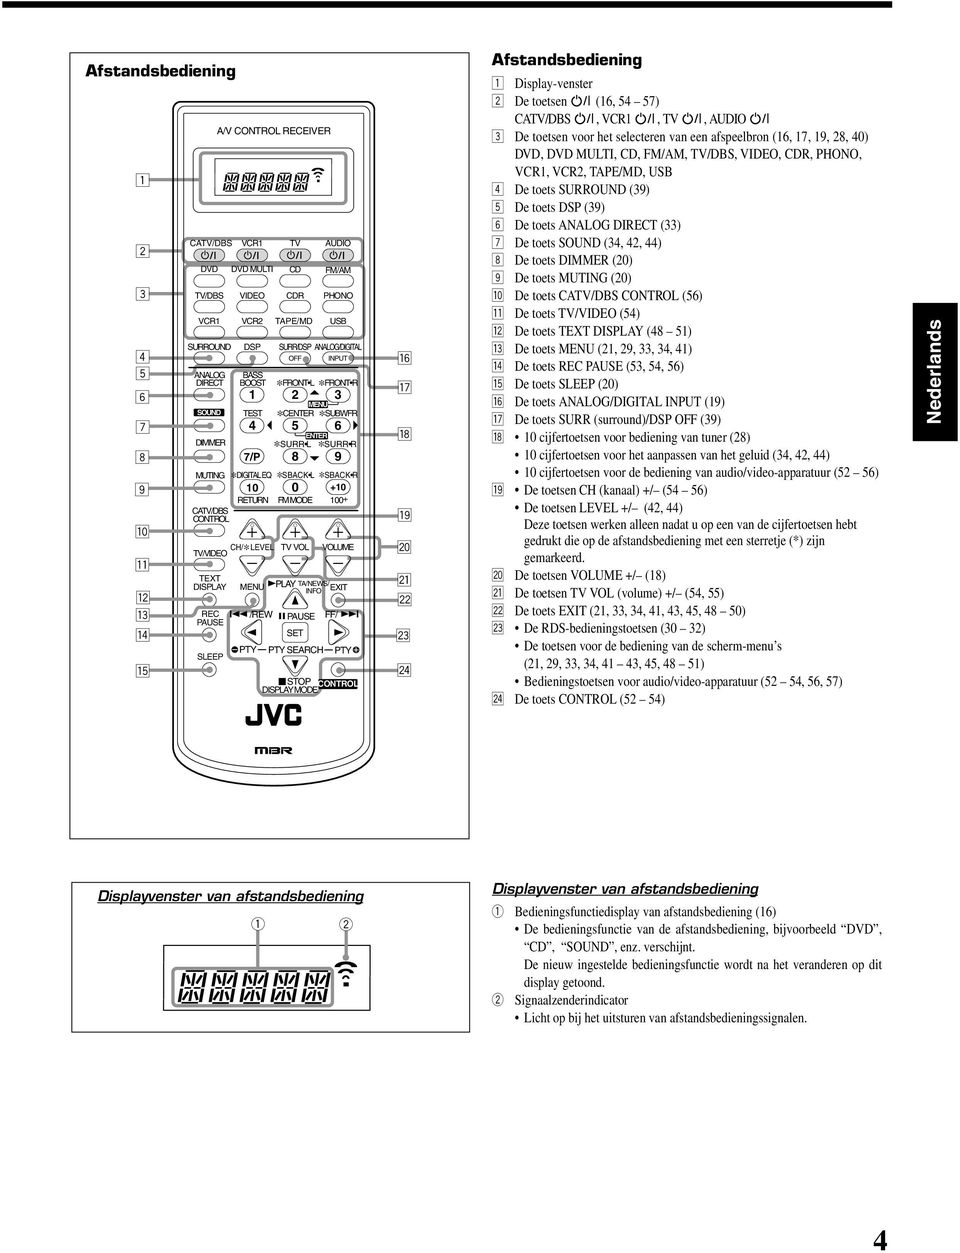 SOUND TEXT DISPLAY A/V CONTROL RECEIVER VCR2 TAPE/MD FM/AM USB + VOLUME PLAY TA/NEWS/ INFO EXIT /REW PAUSE FF/ SET PTY PTY SEARCH PTY STOP CONTROL DISPLAY MODE y u i o ; a s d f Afstandsbediening 1